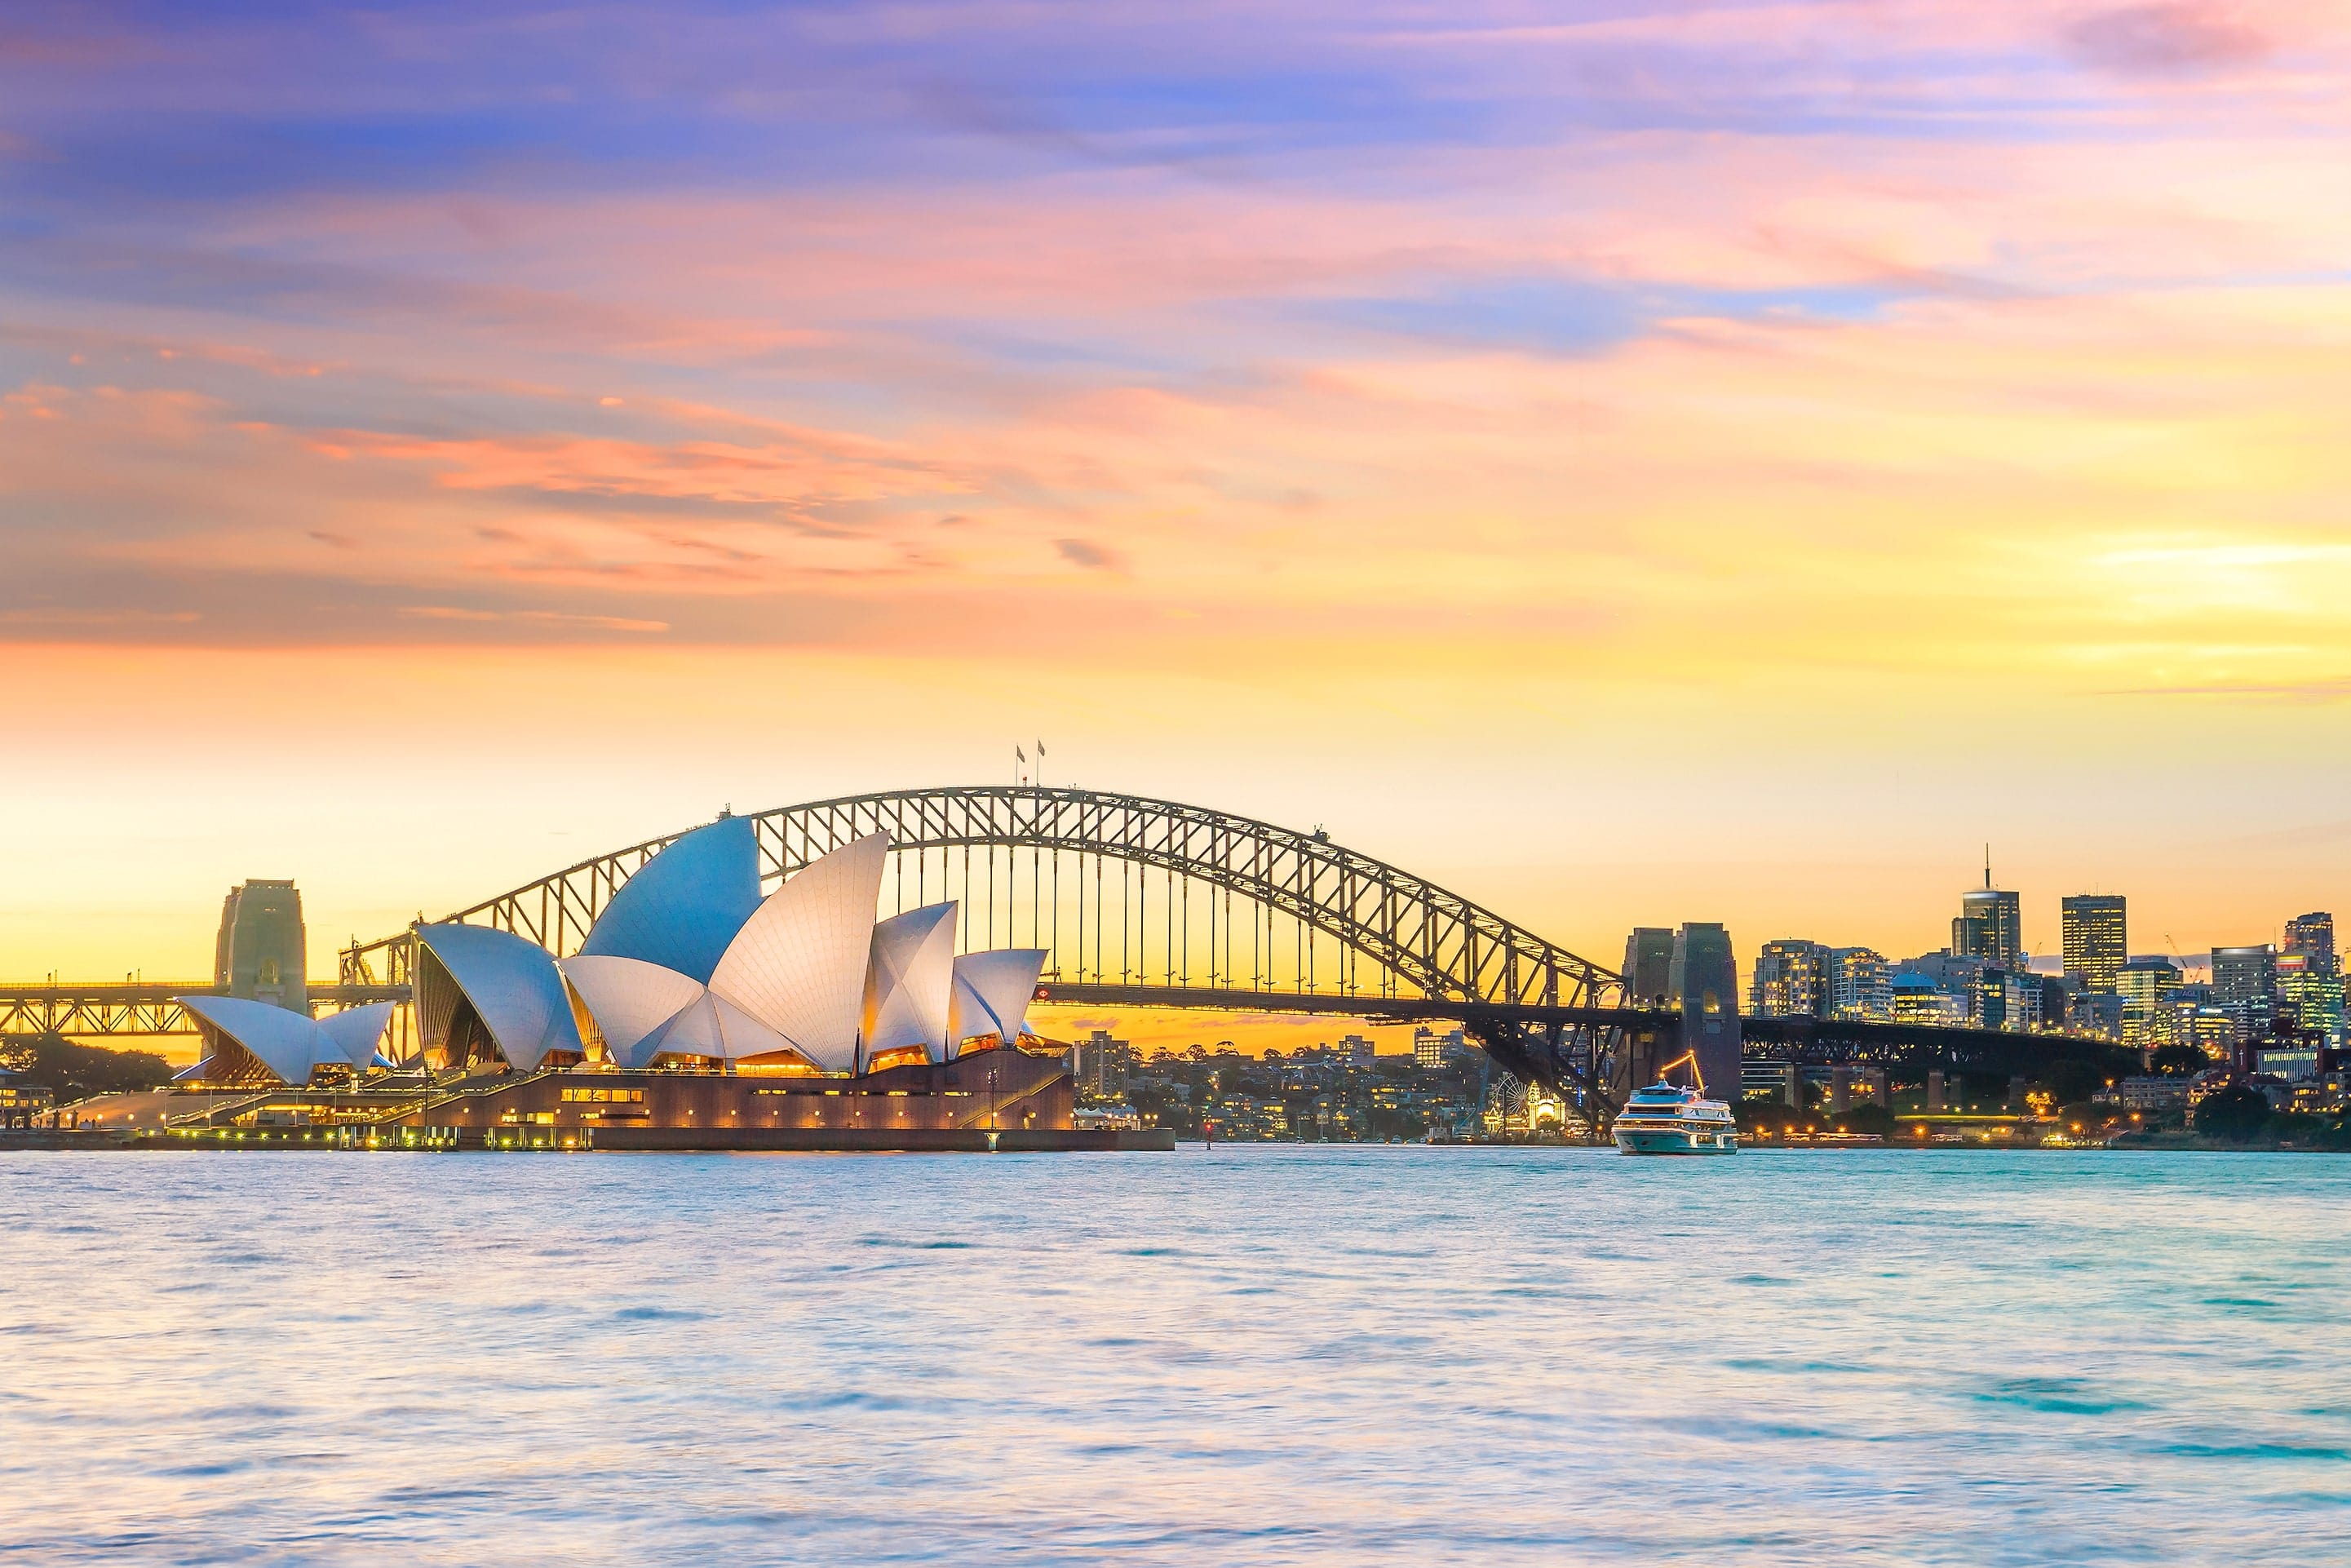 Tourist attractions in Sydney